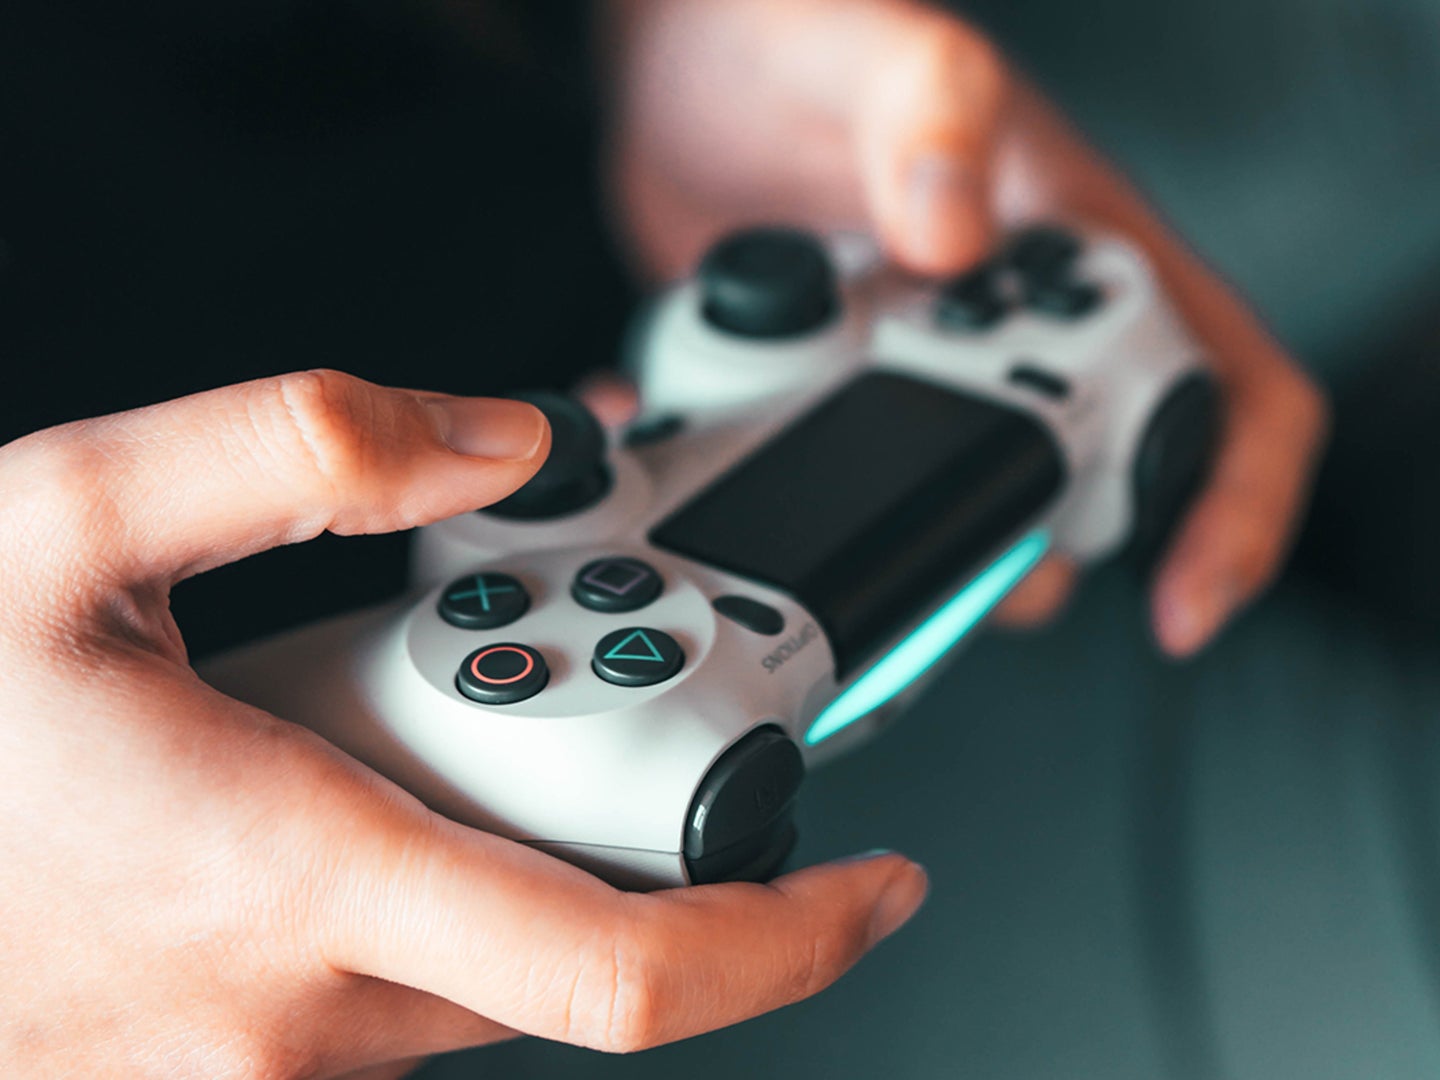 A close-up of a person holding a Playstation 5 controller